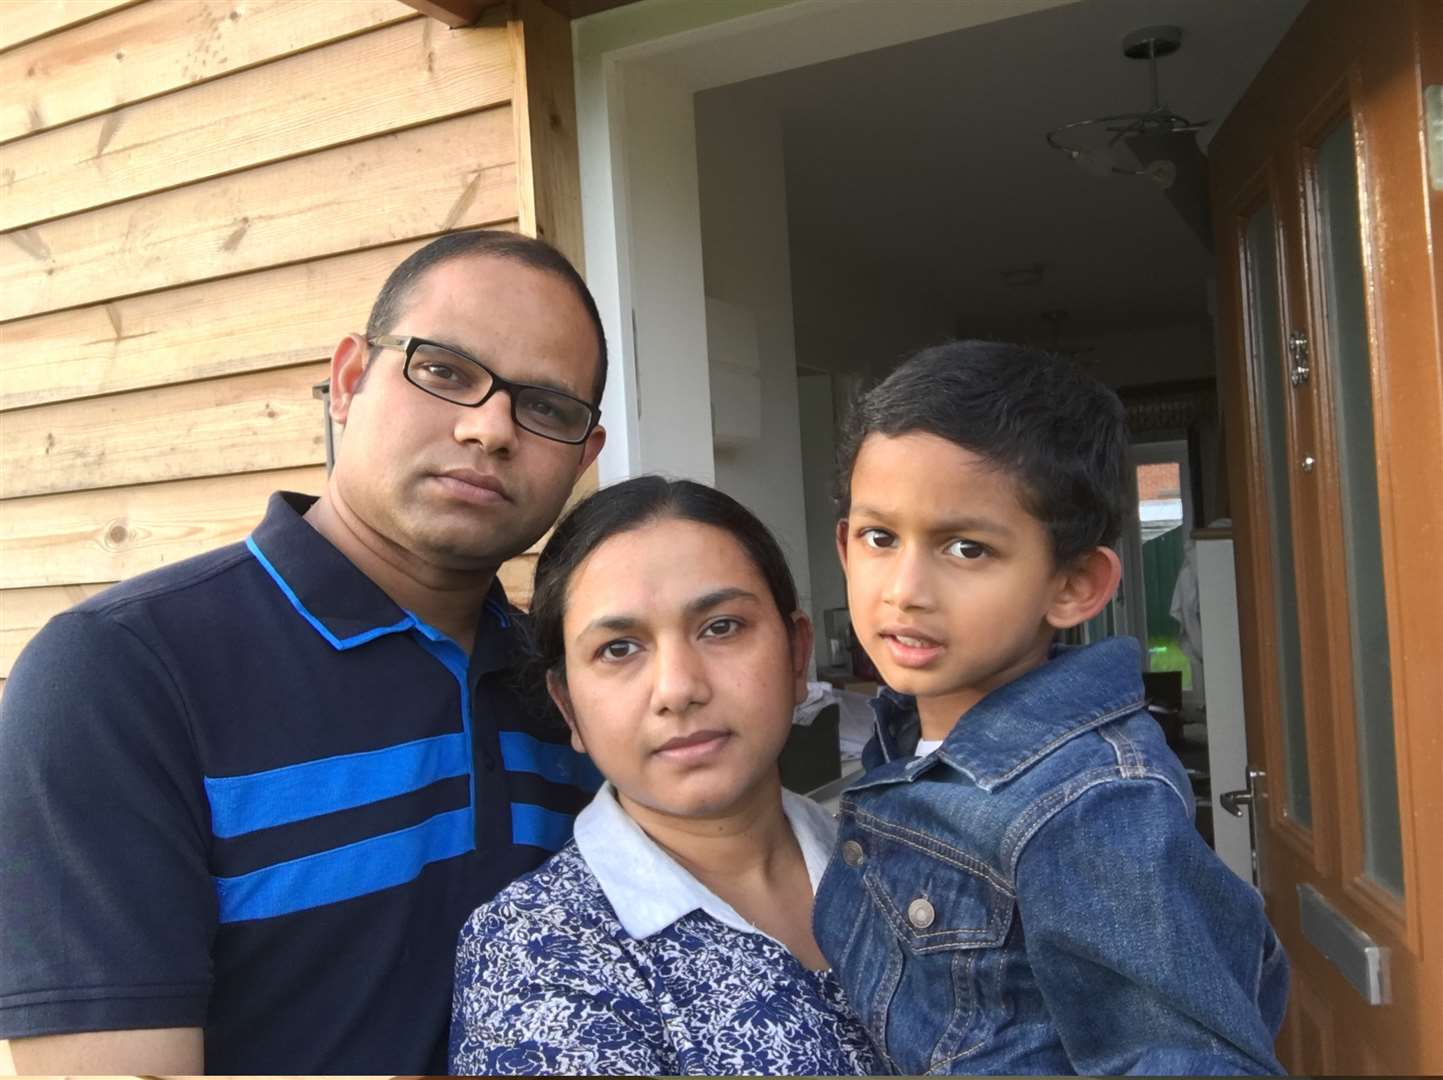 Debi Das (left) with his wife Swagatika Patra and son, four-year-old Divyum.